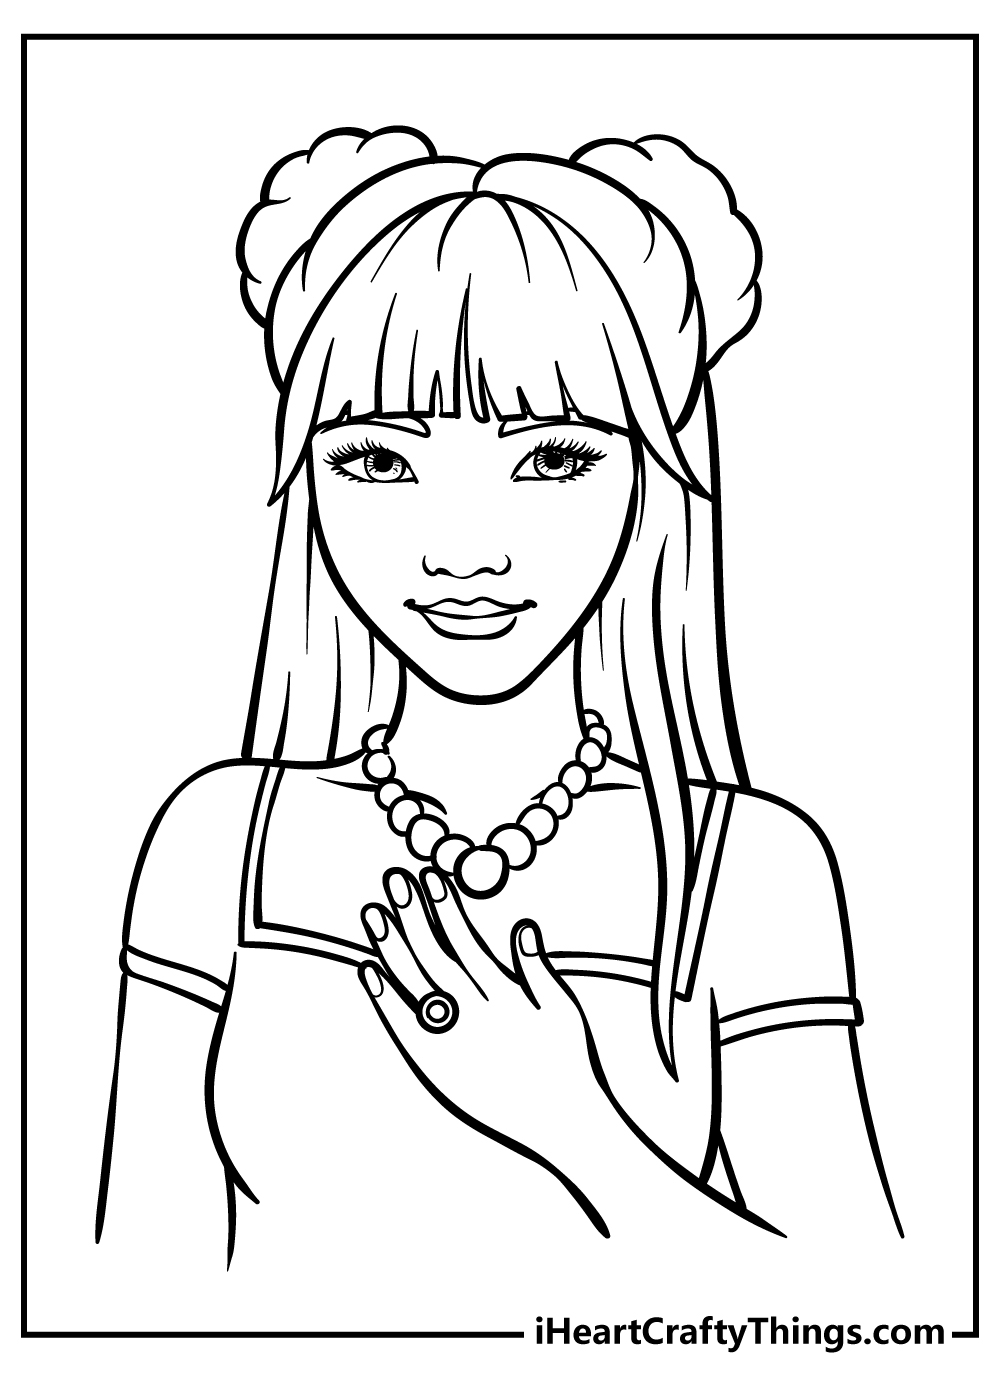 Printable Coloring Pages For Teens Updated 21